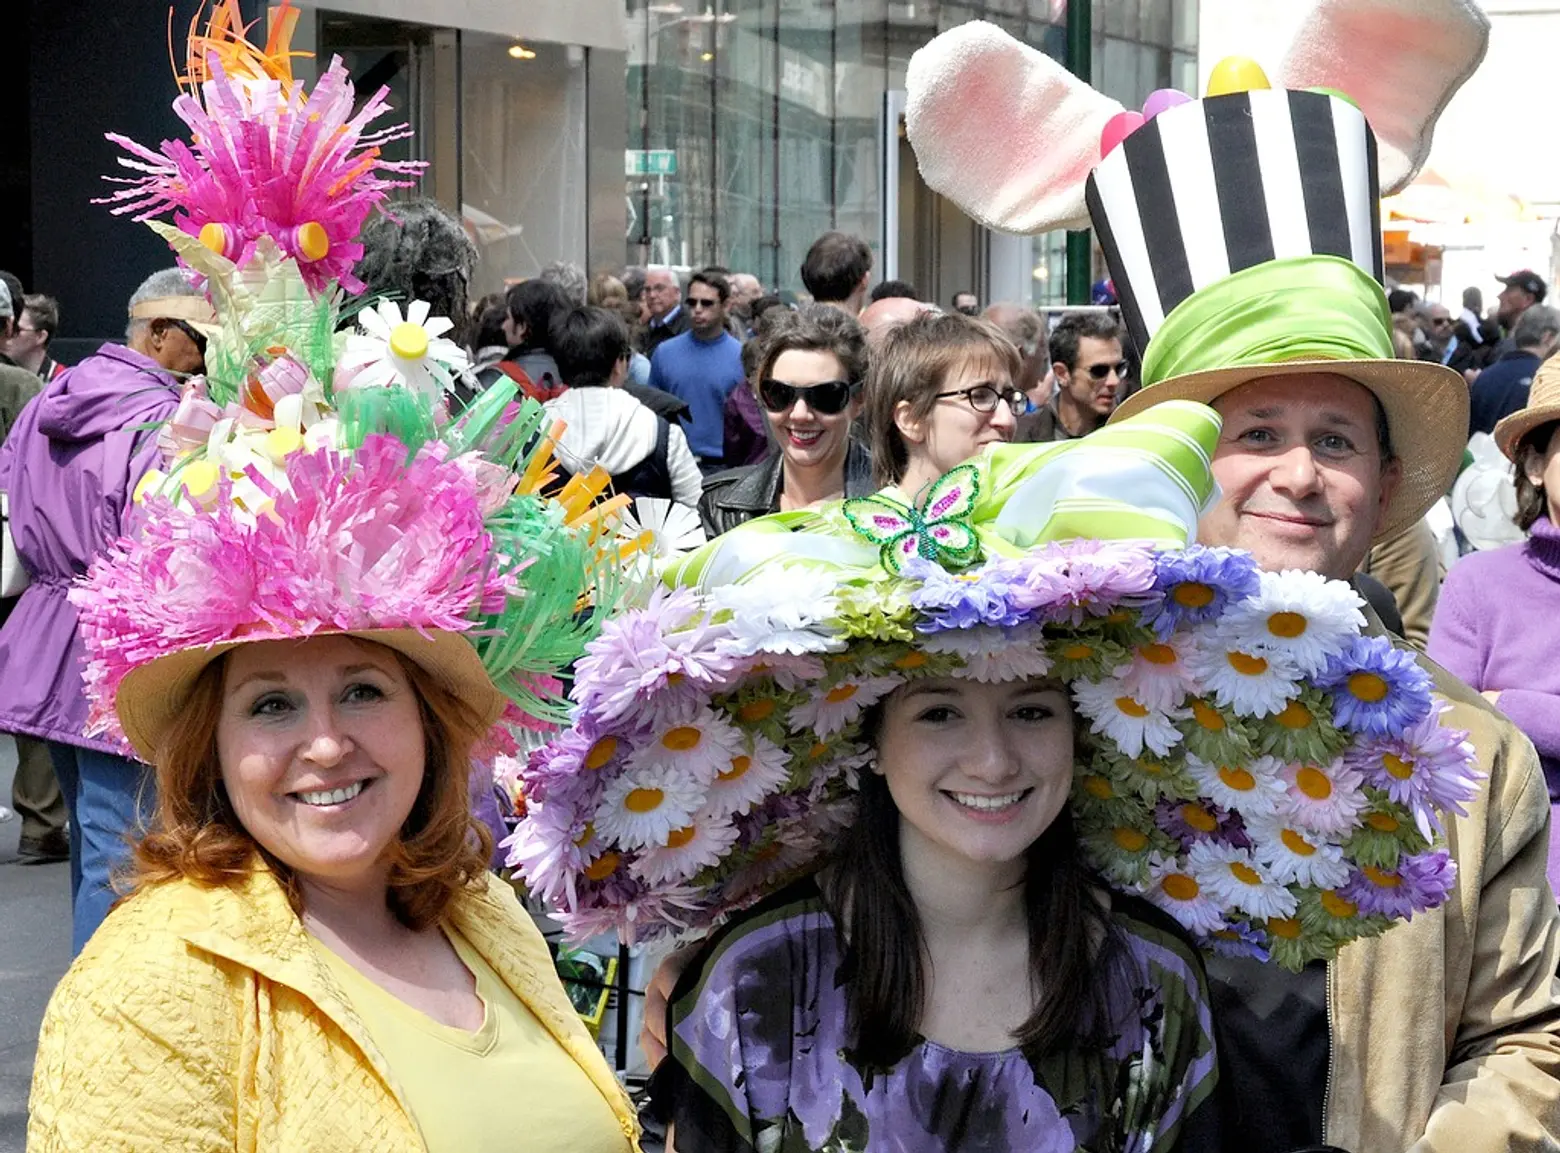 NYC Easter Parade, moder Easter bonnets